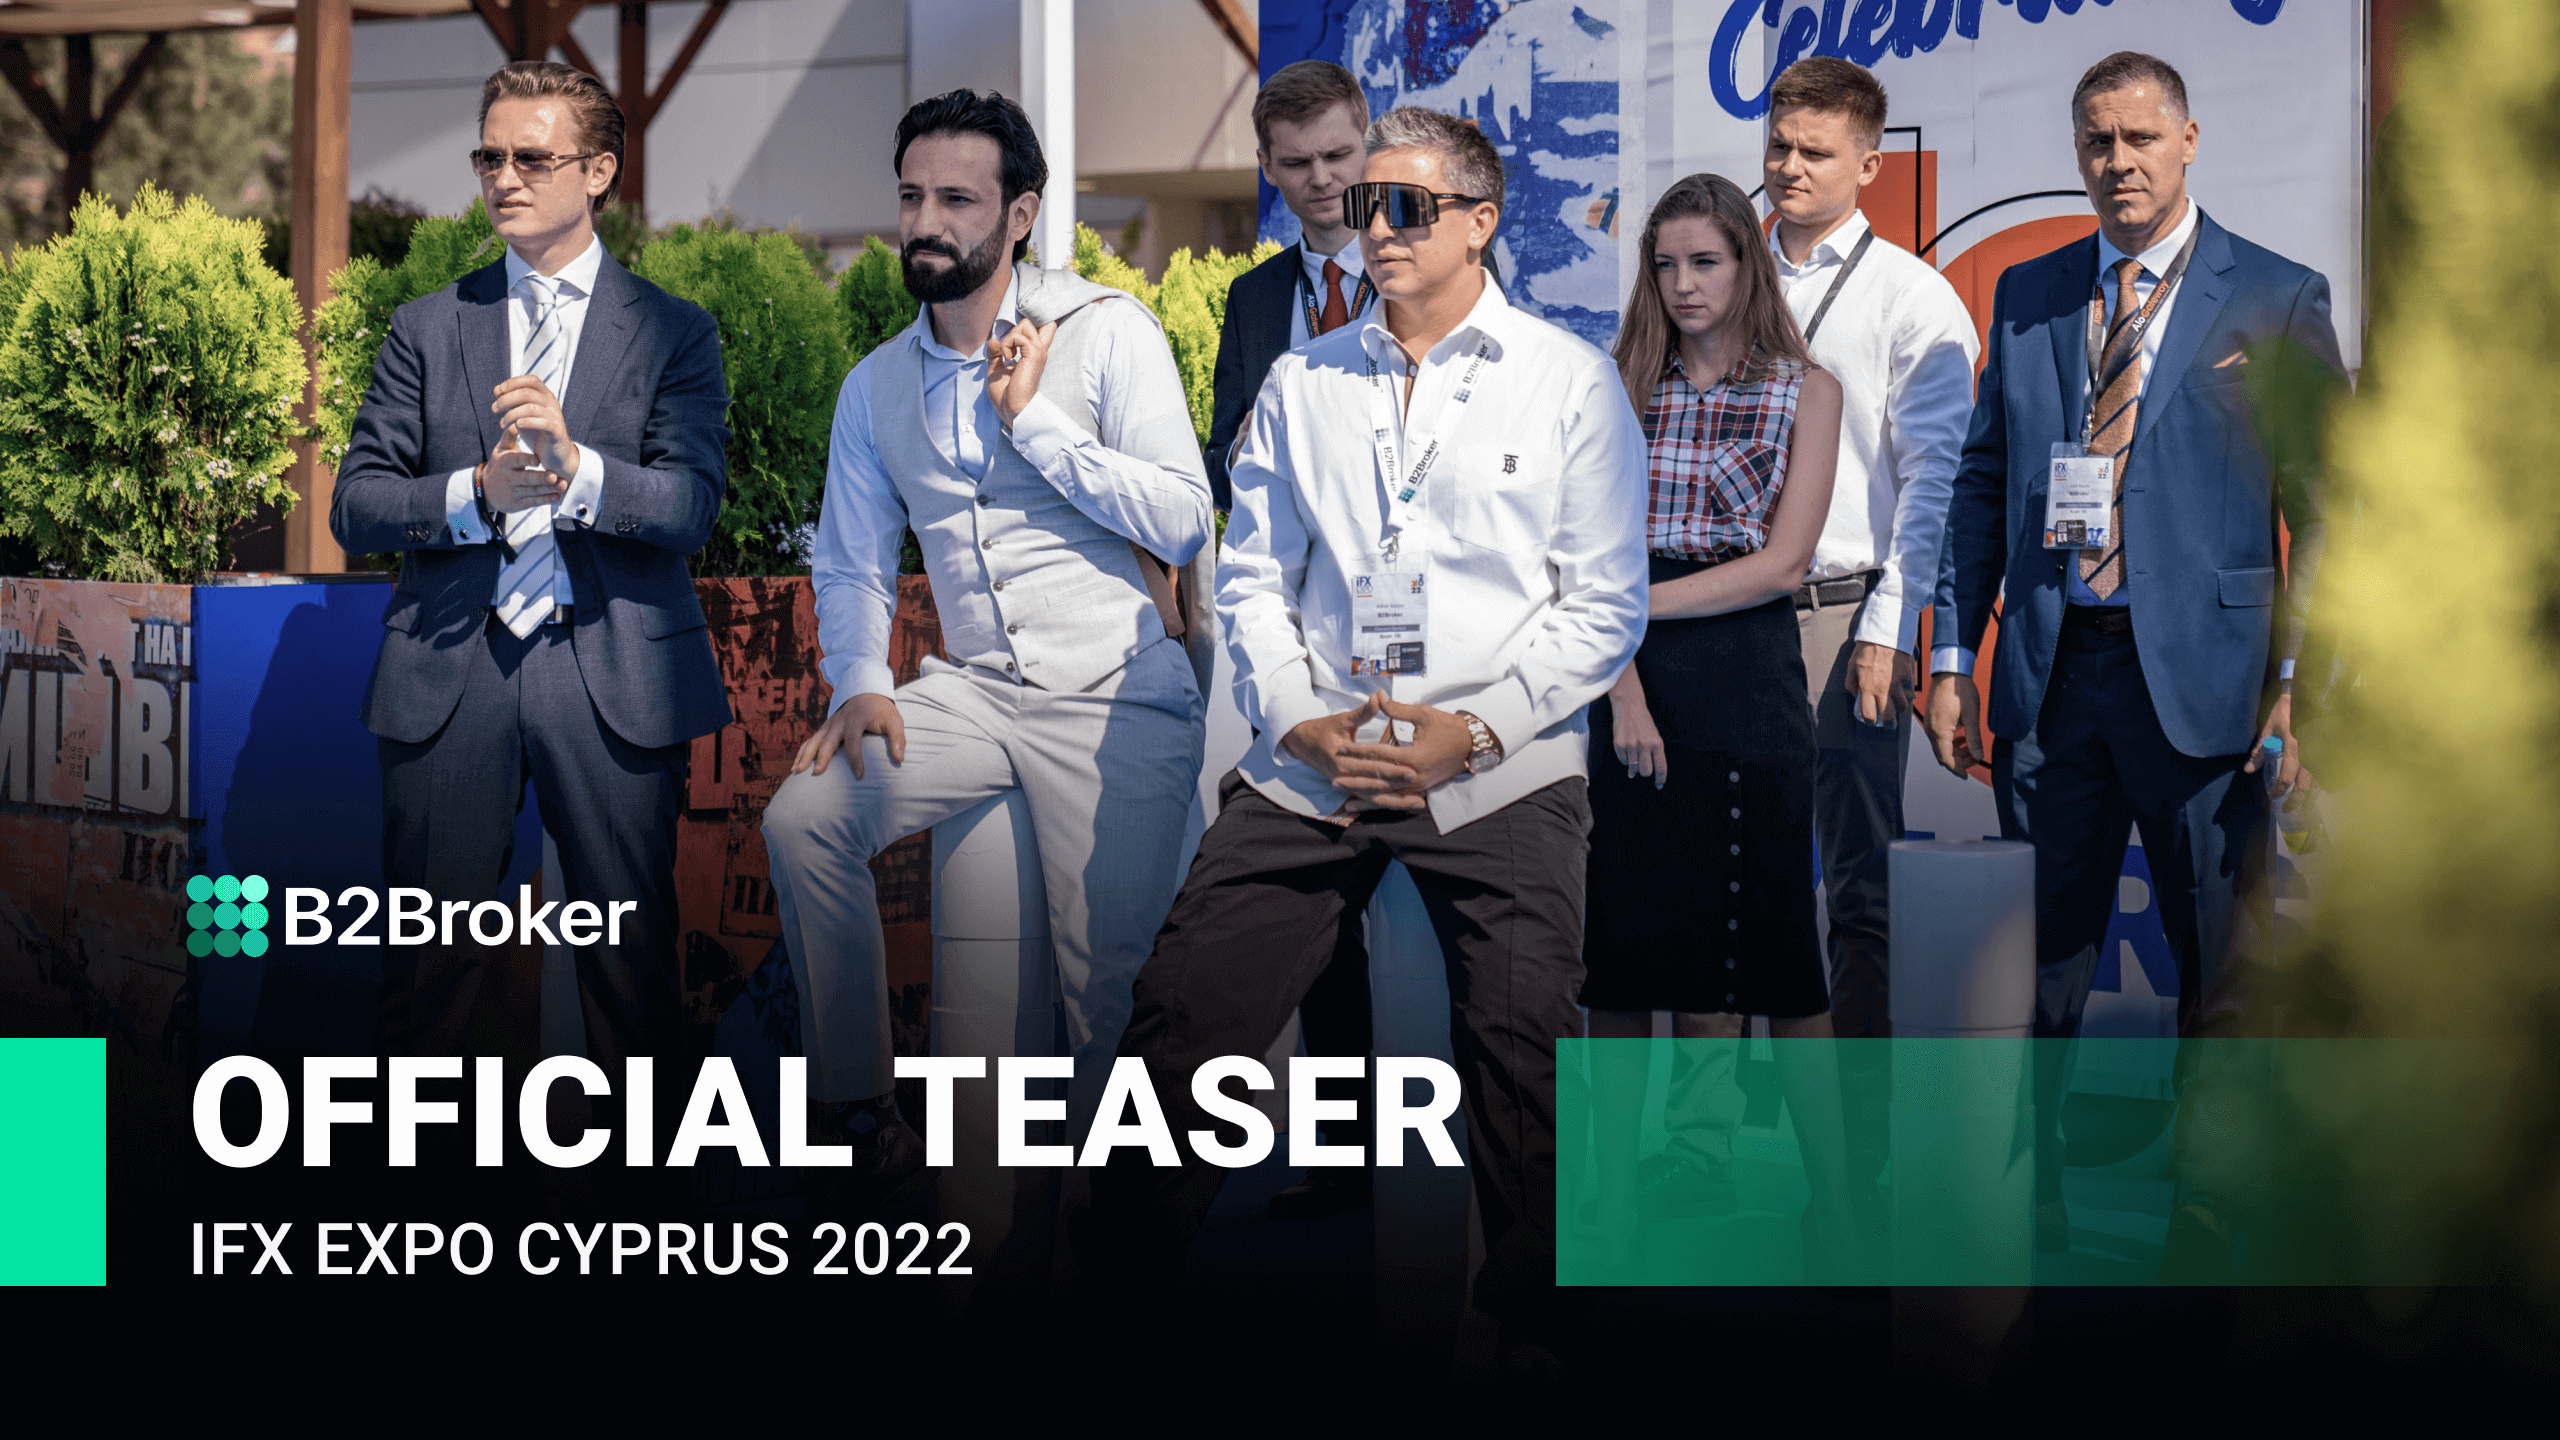 Teaser | Our Video Report from iFX Expo Cyprus 2022 is Coming Soon!